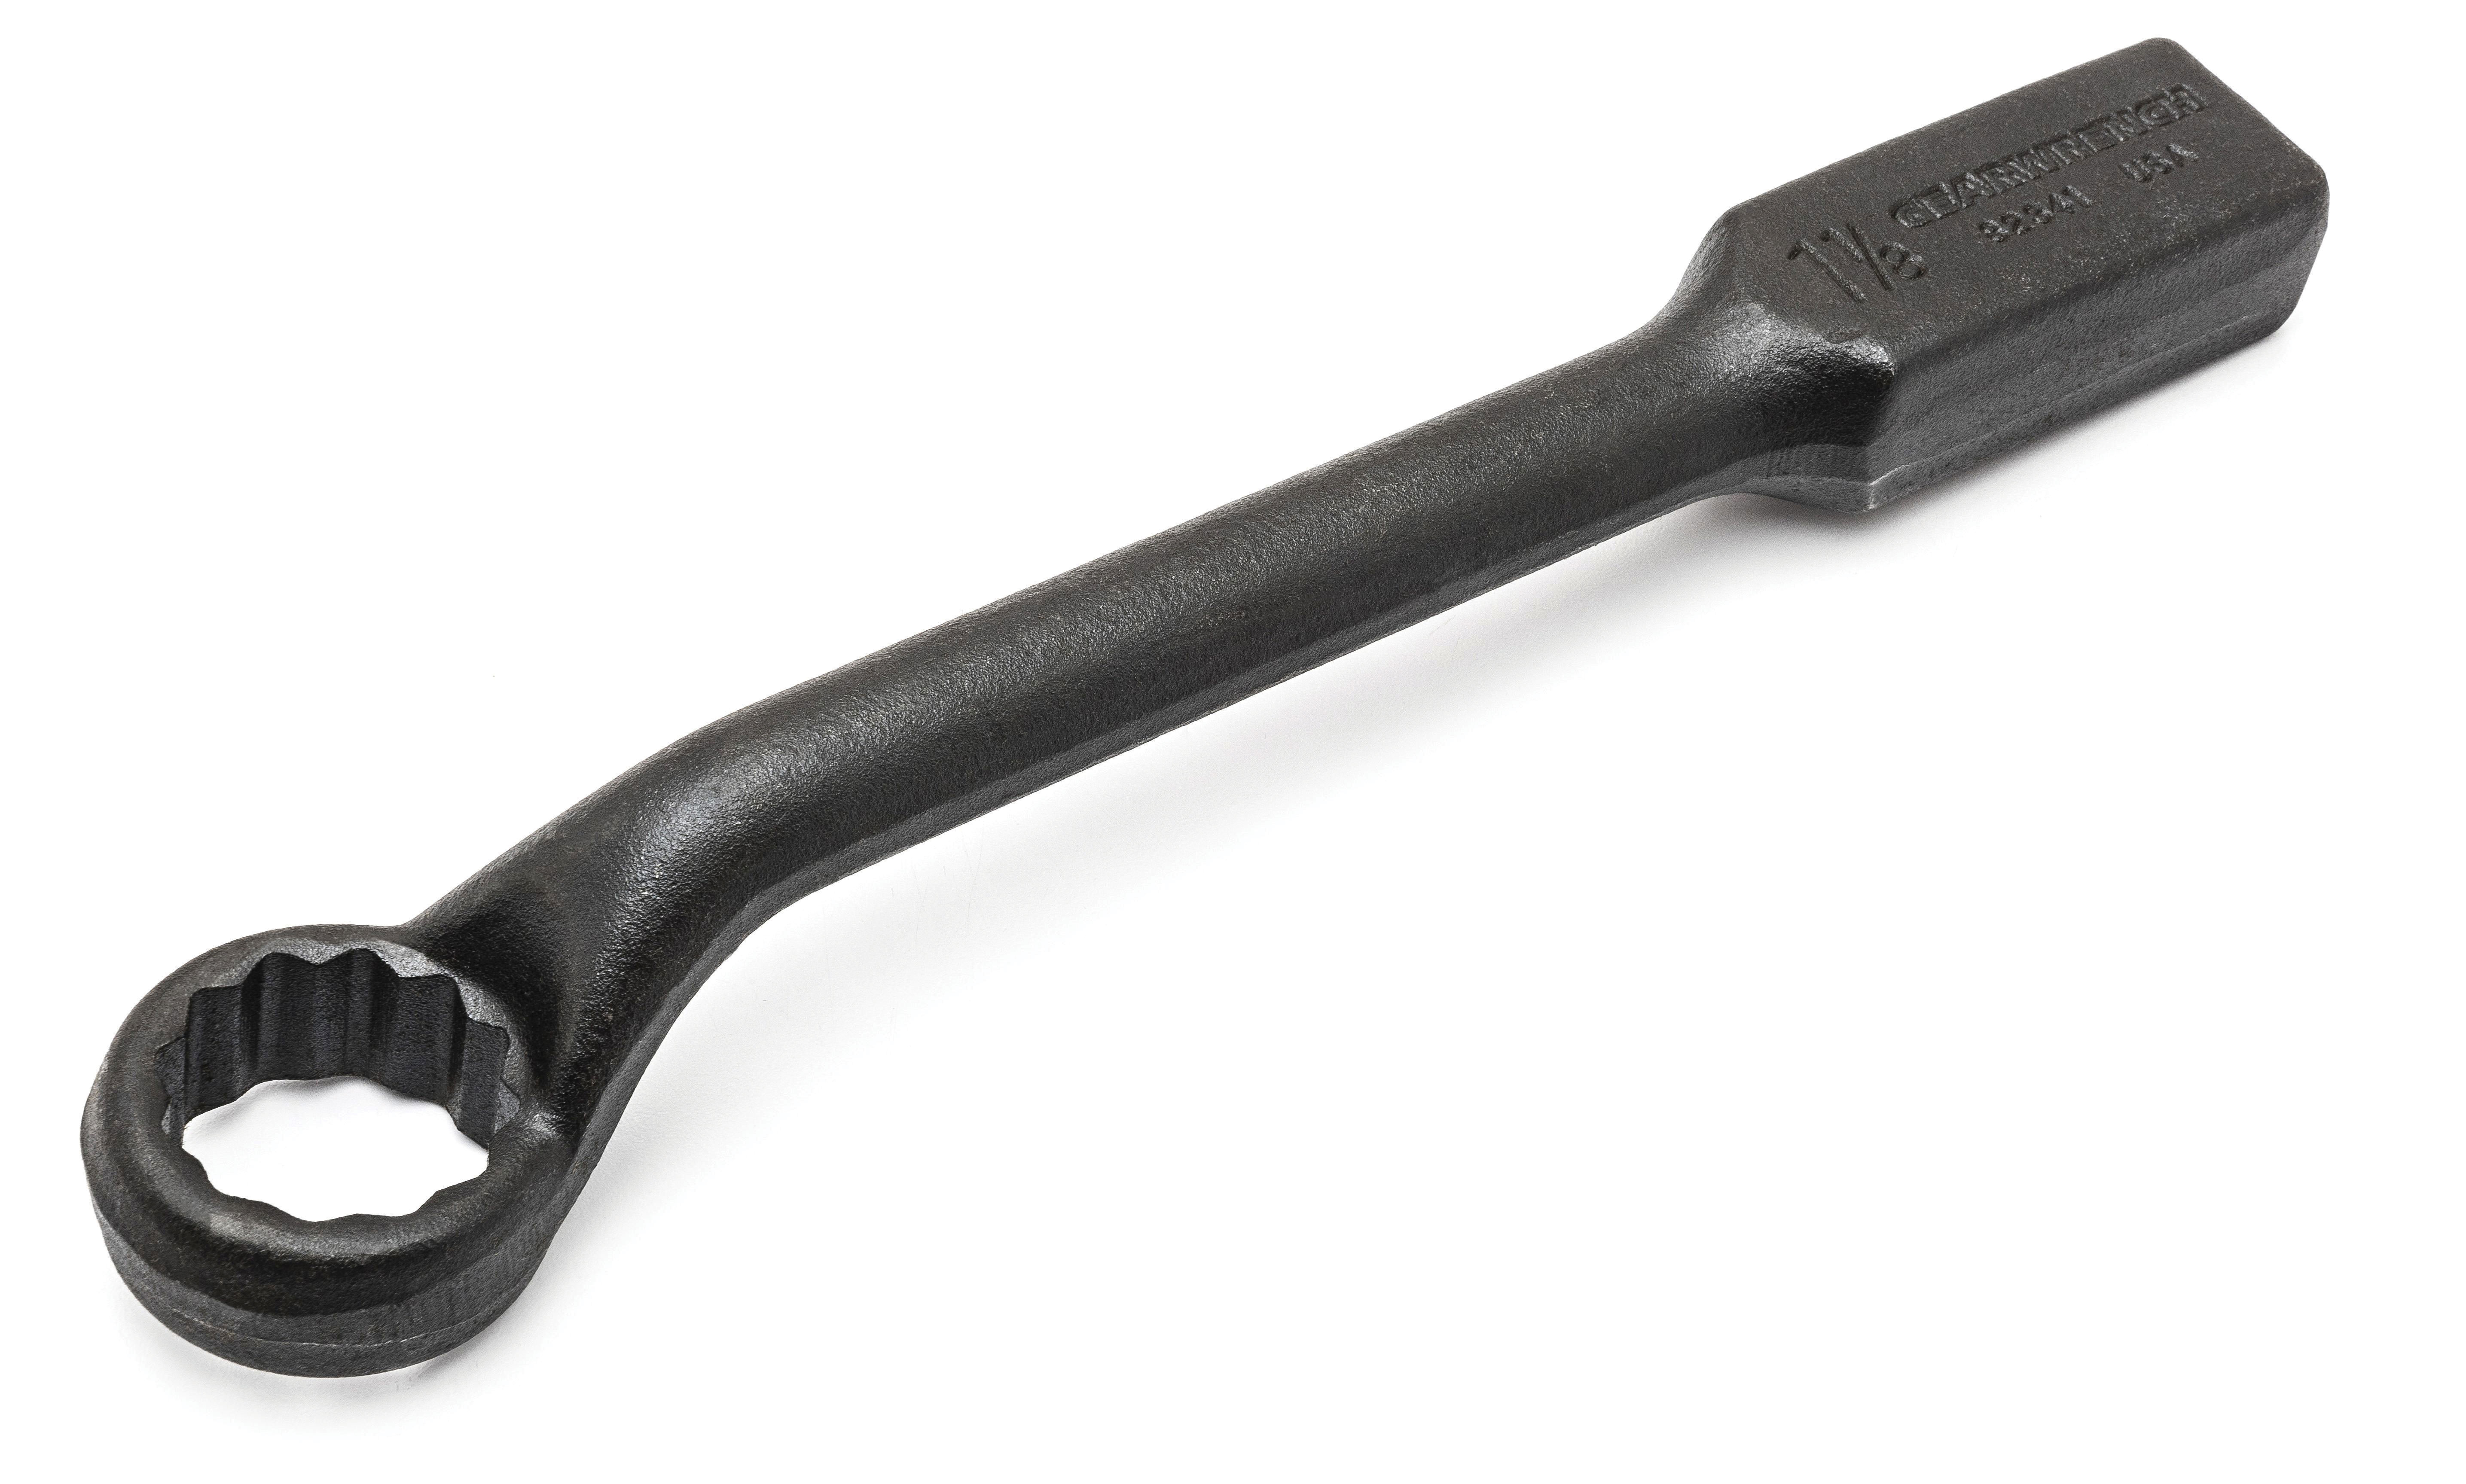 Apex Tool Group's GearWrench